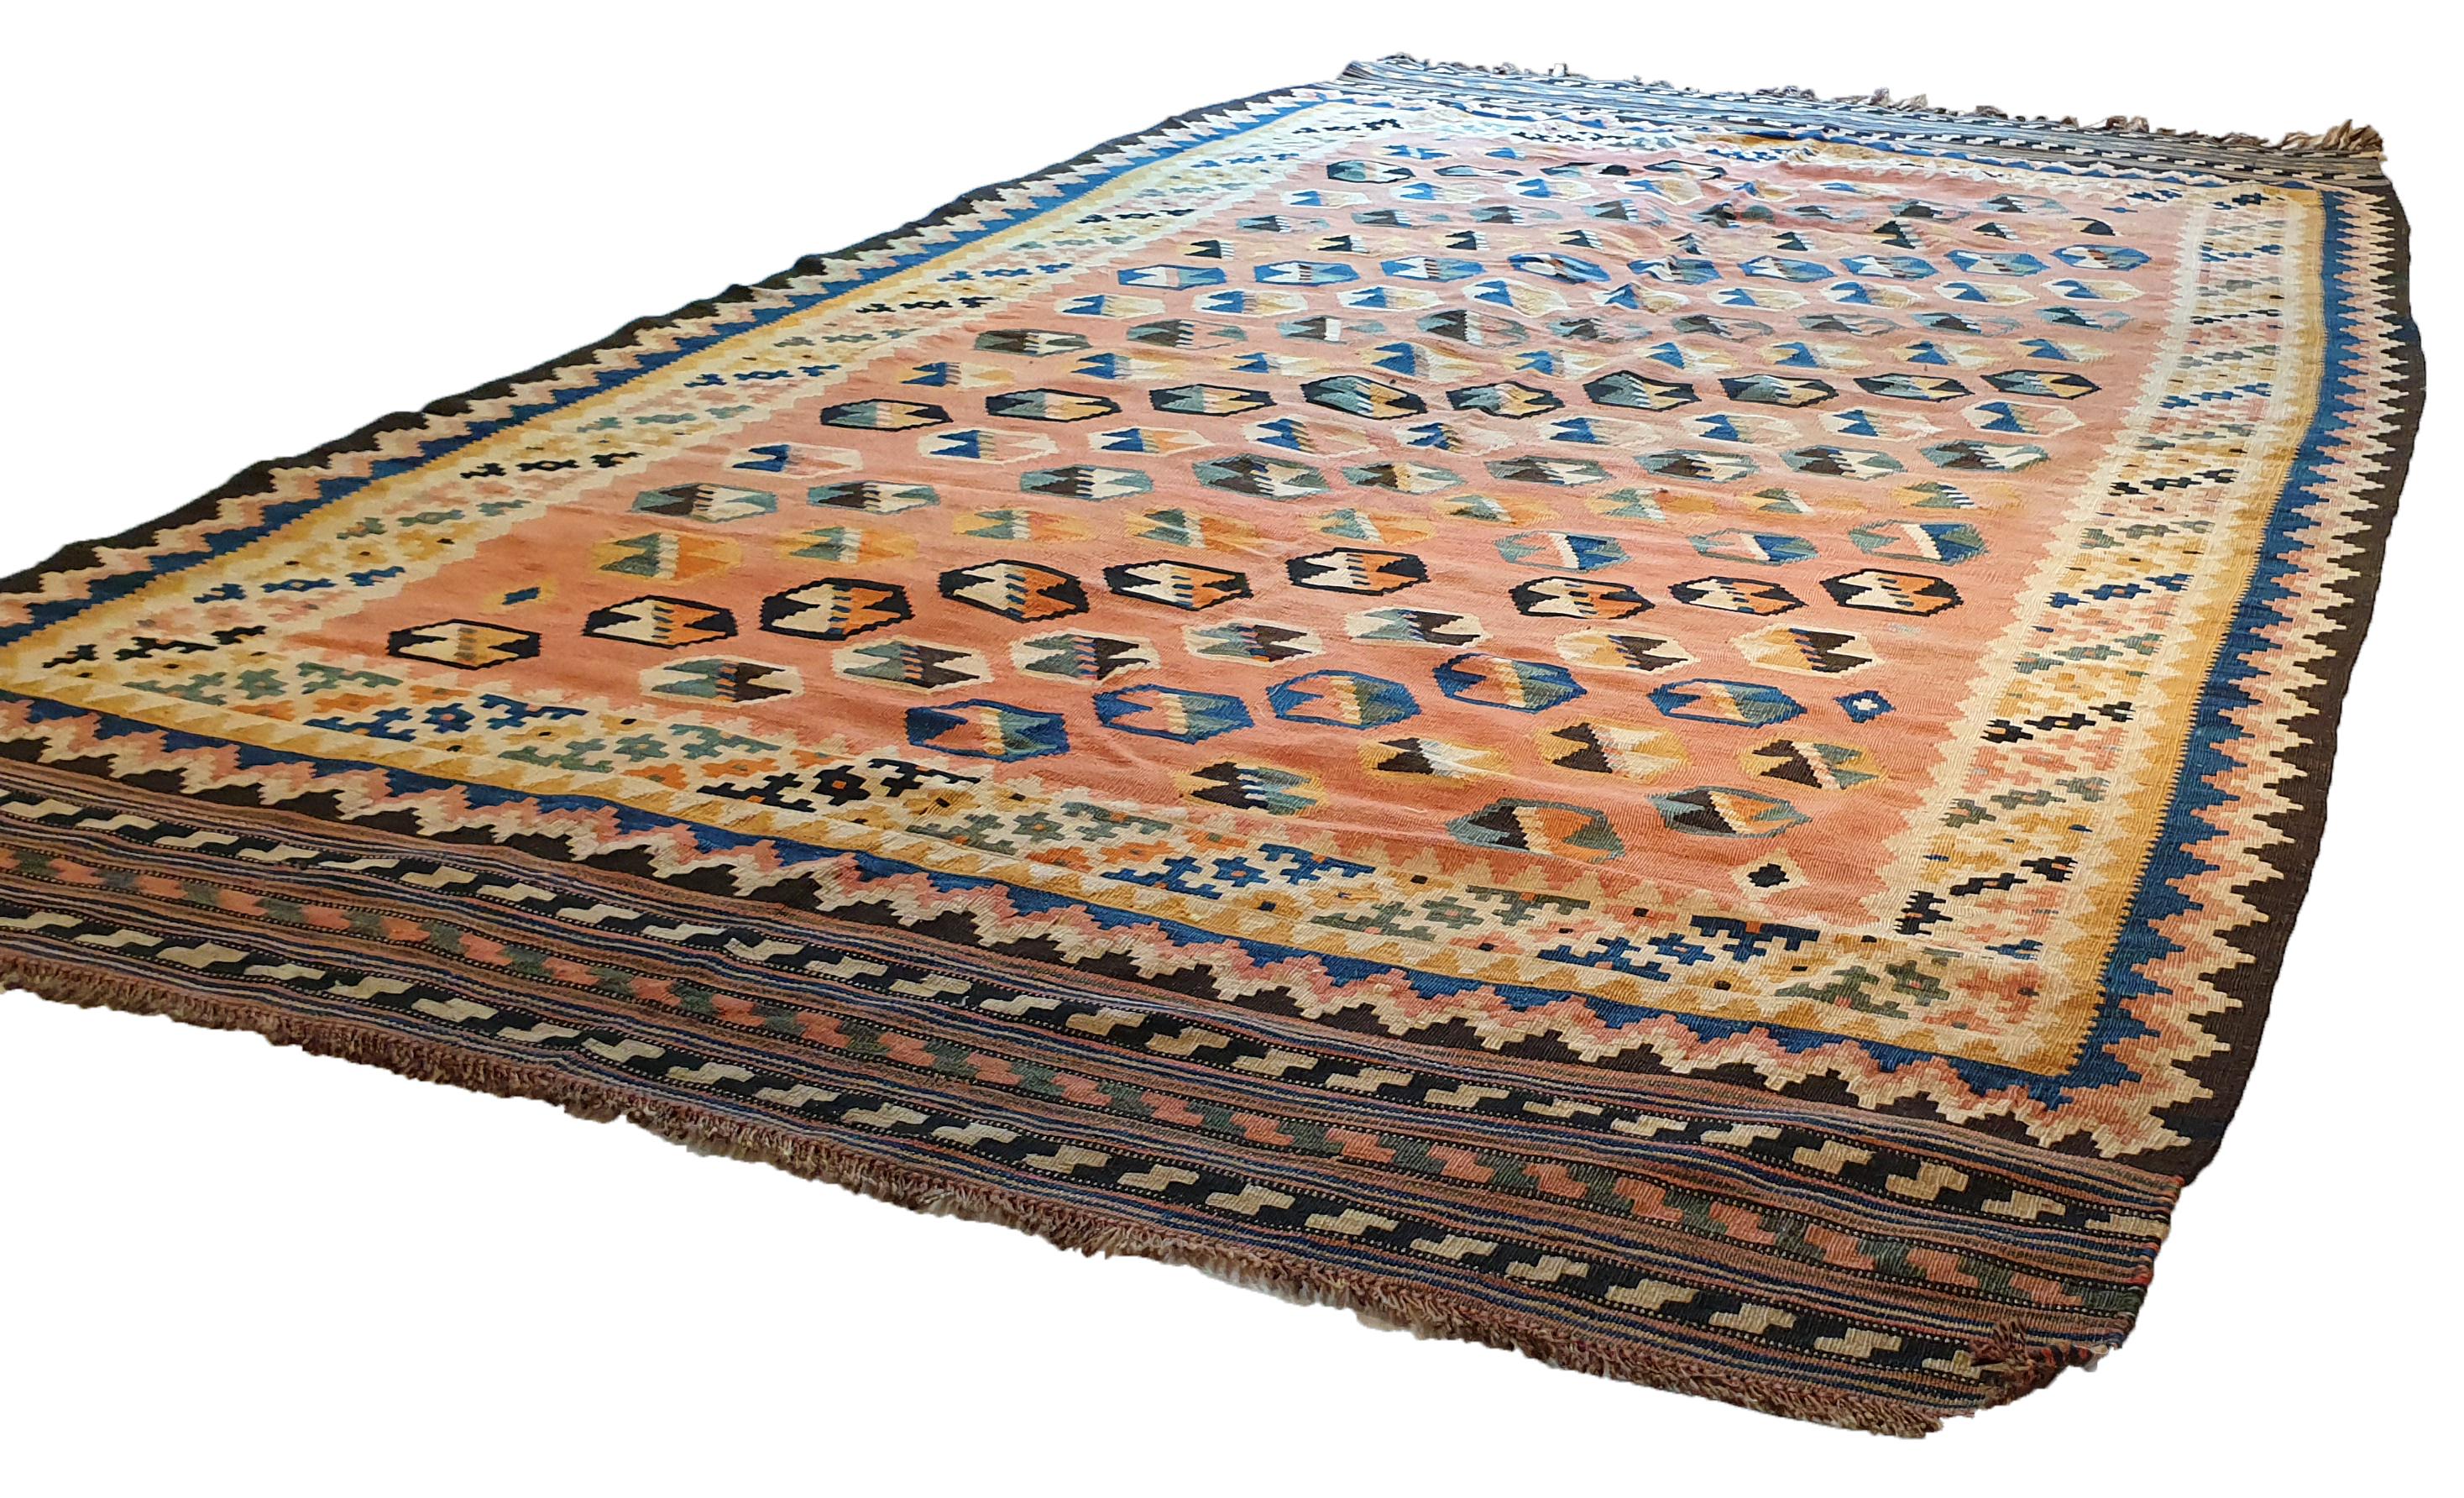 761 - Pretty mid 20th century Kilim with geometric tribal design and beautiful orange, purple, black and green colors, fully hand woven with wool on wool background.